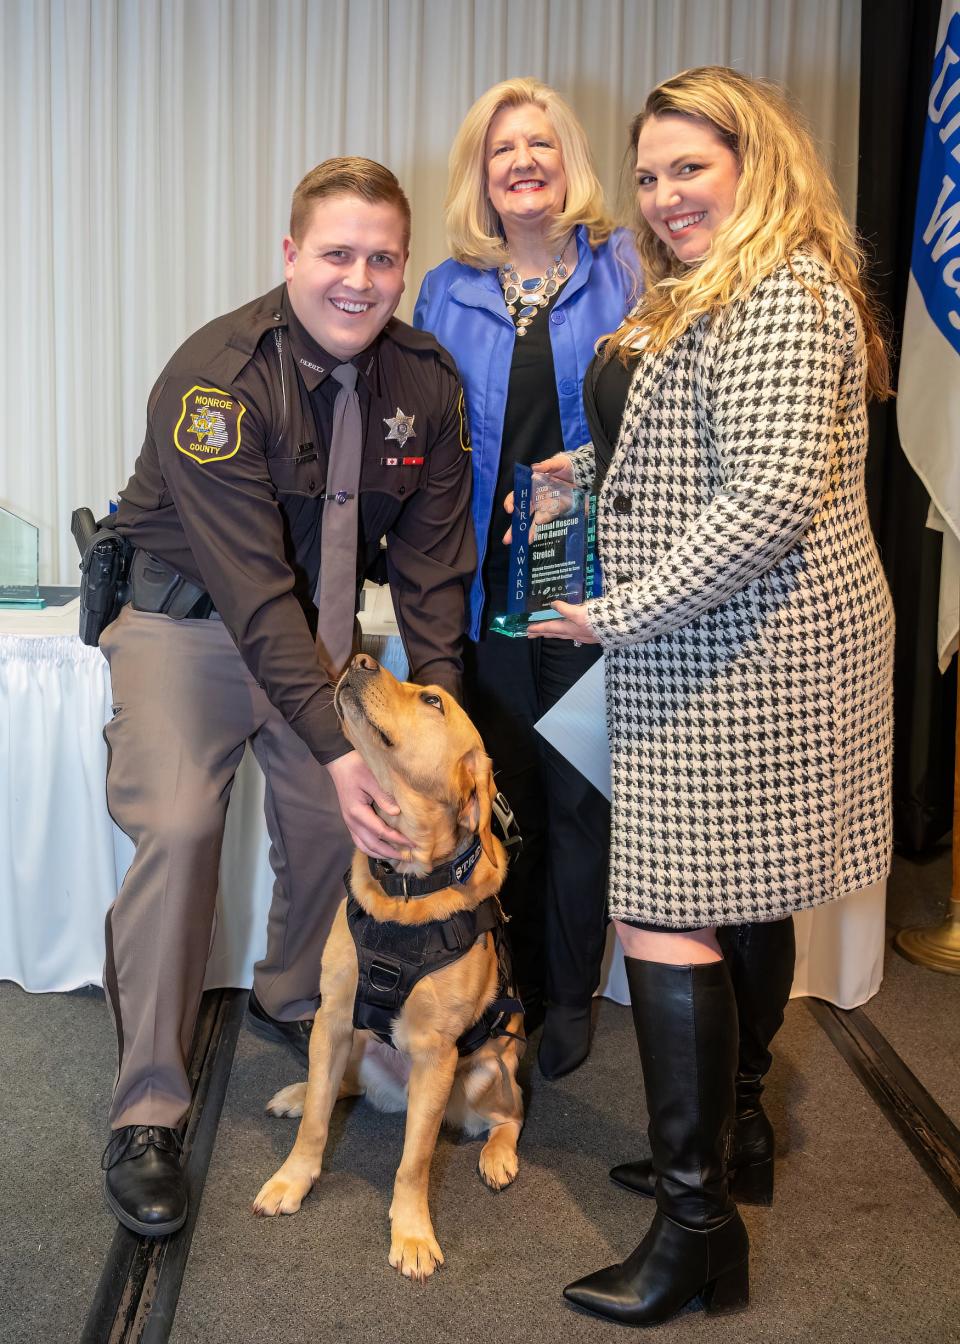 Pictured are Monroe County Sheriff's Deputy James Liedel, left, with Animal Rescue Hero Stretch, Susan Vanisacker and Ashleigh Glass.